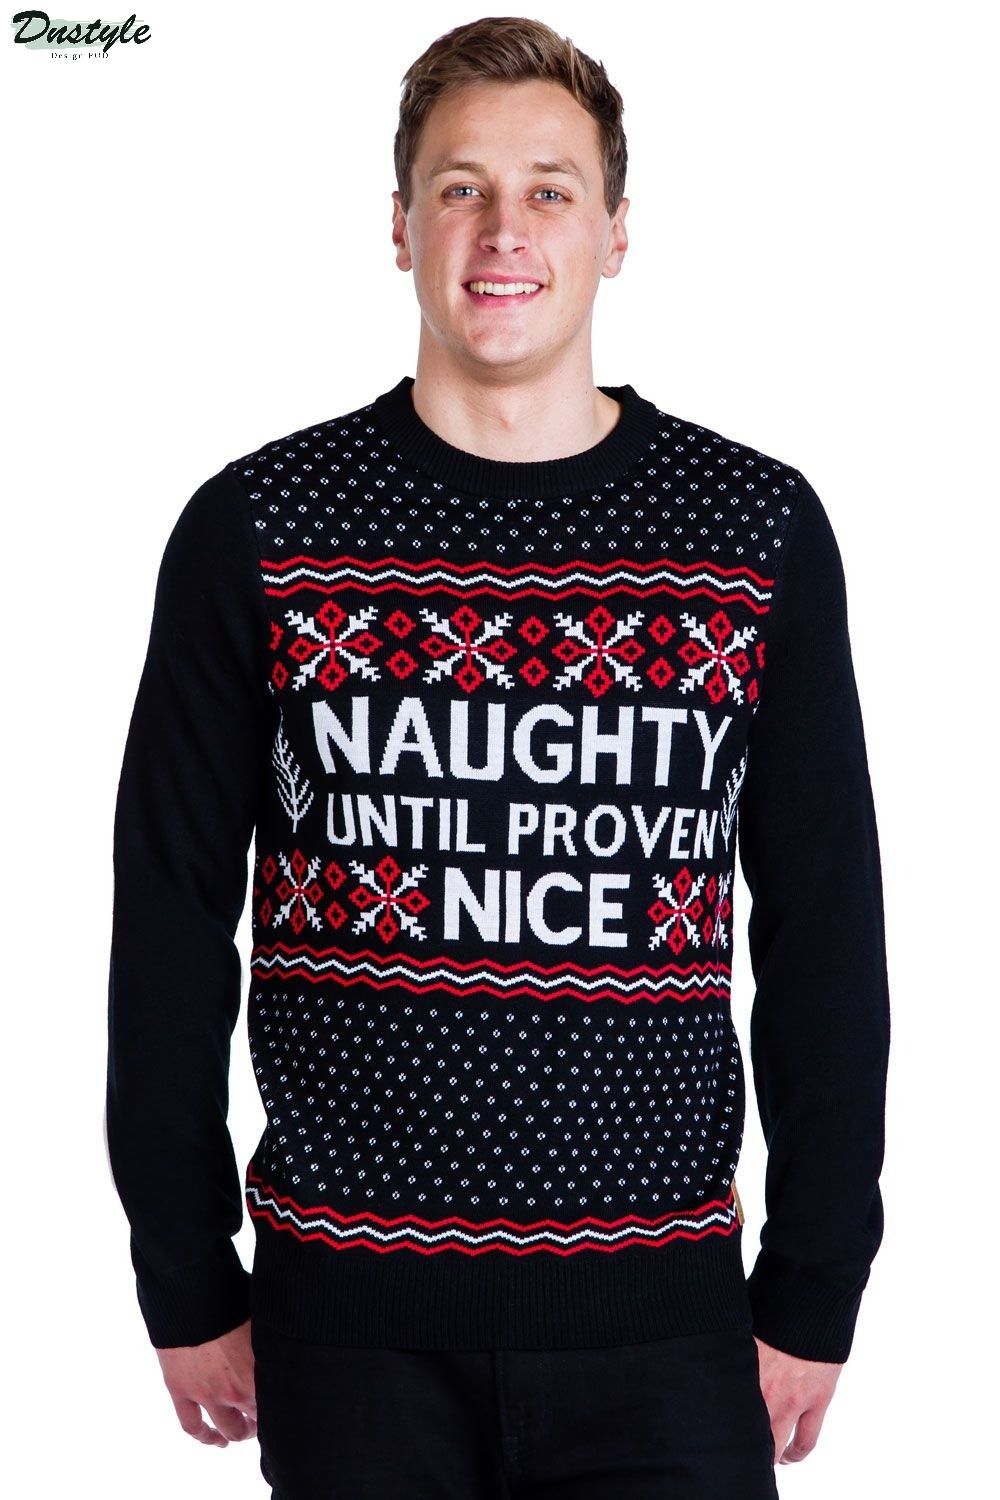 Naughty until proven nice ugly christmas sweater 1